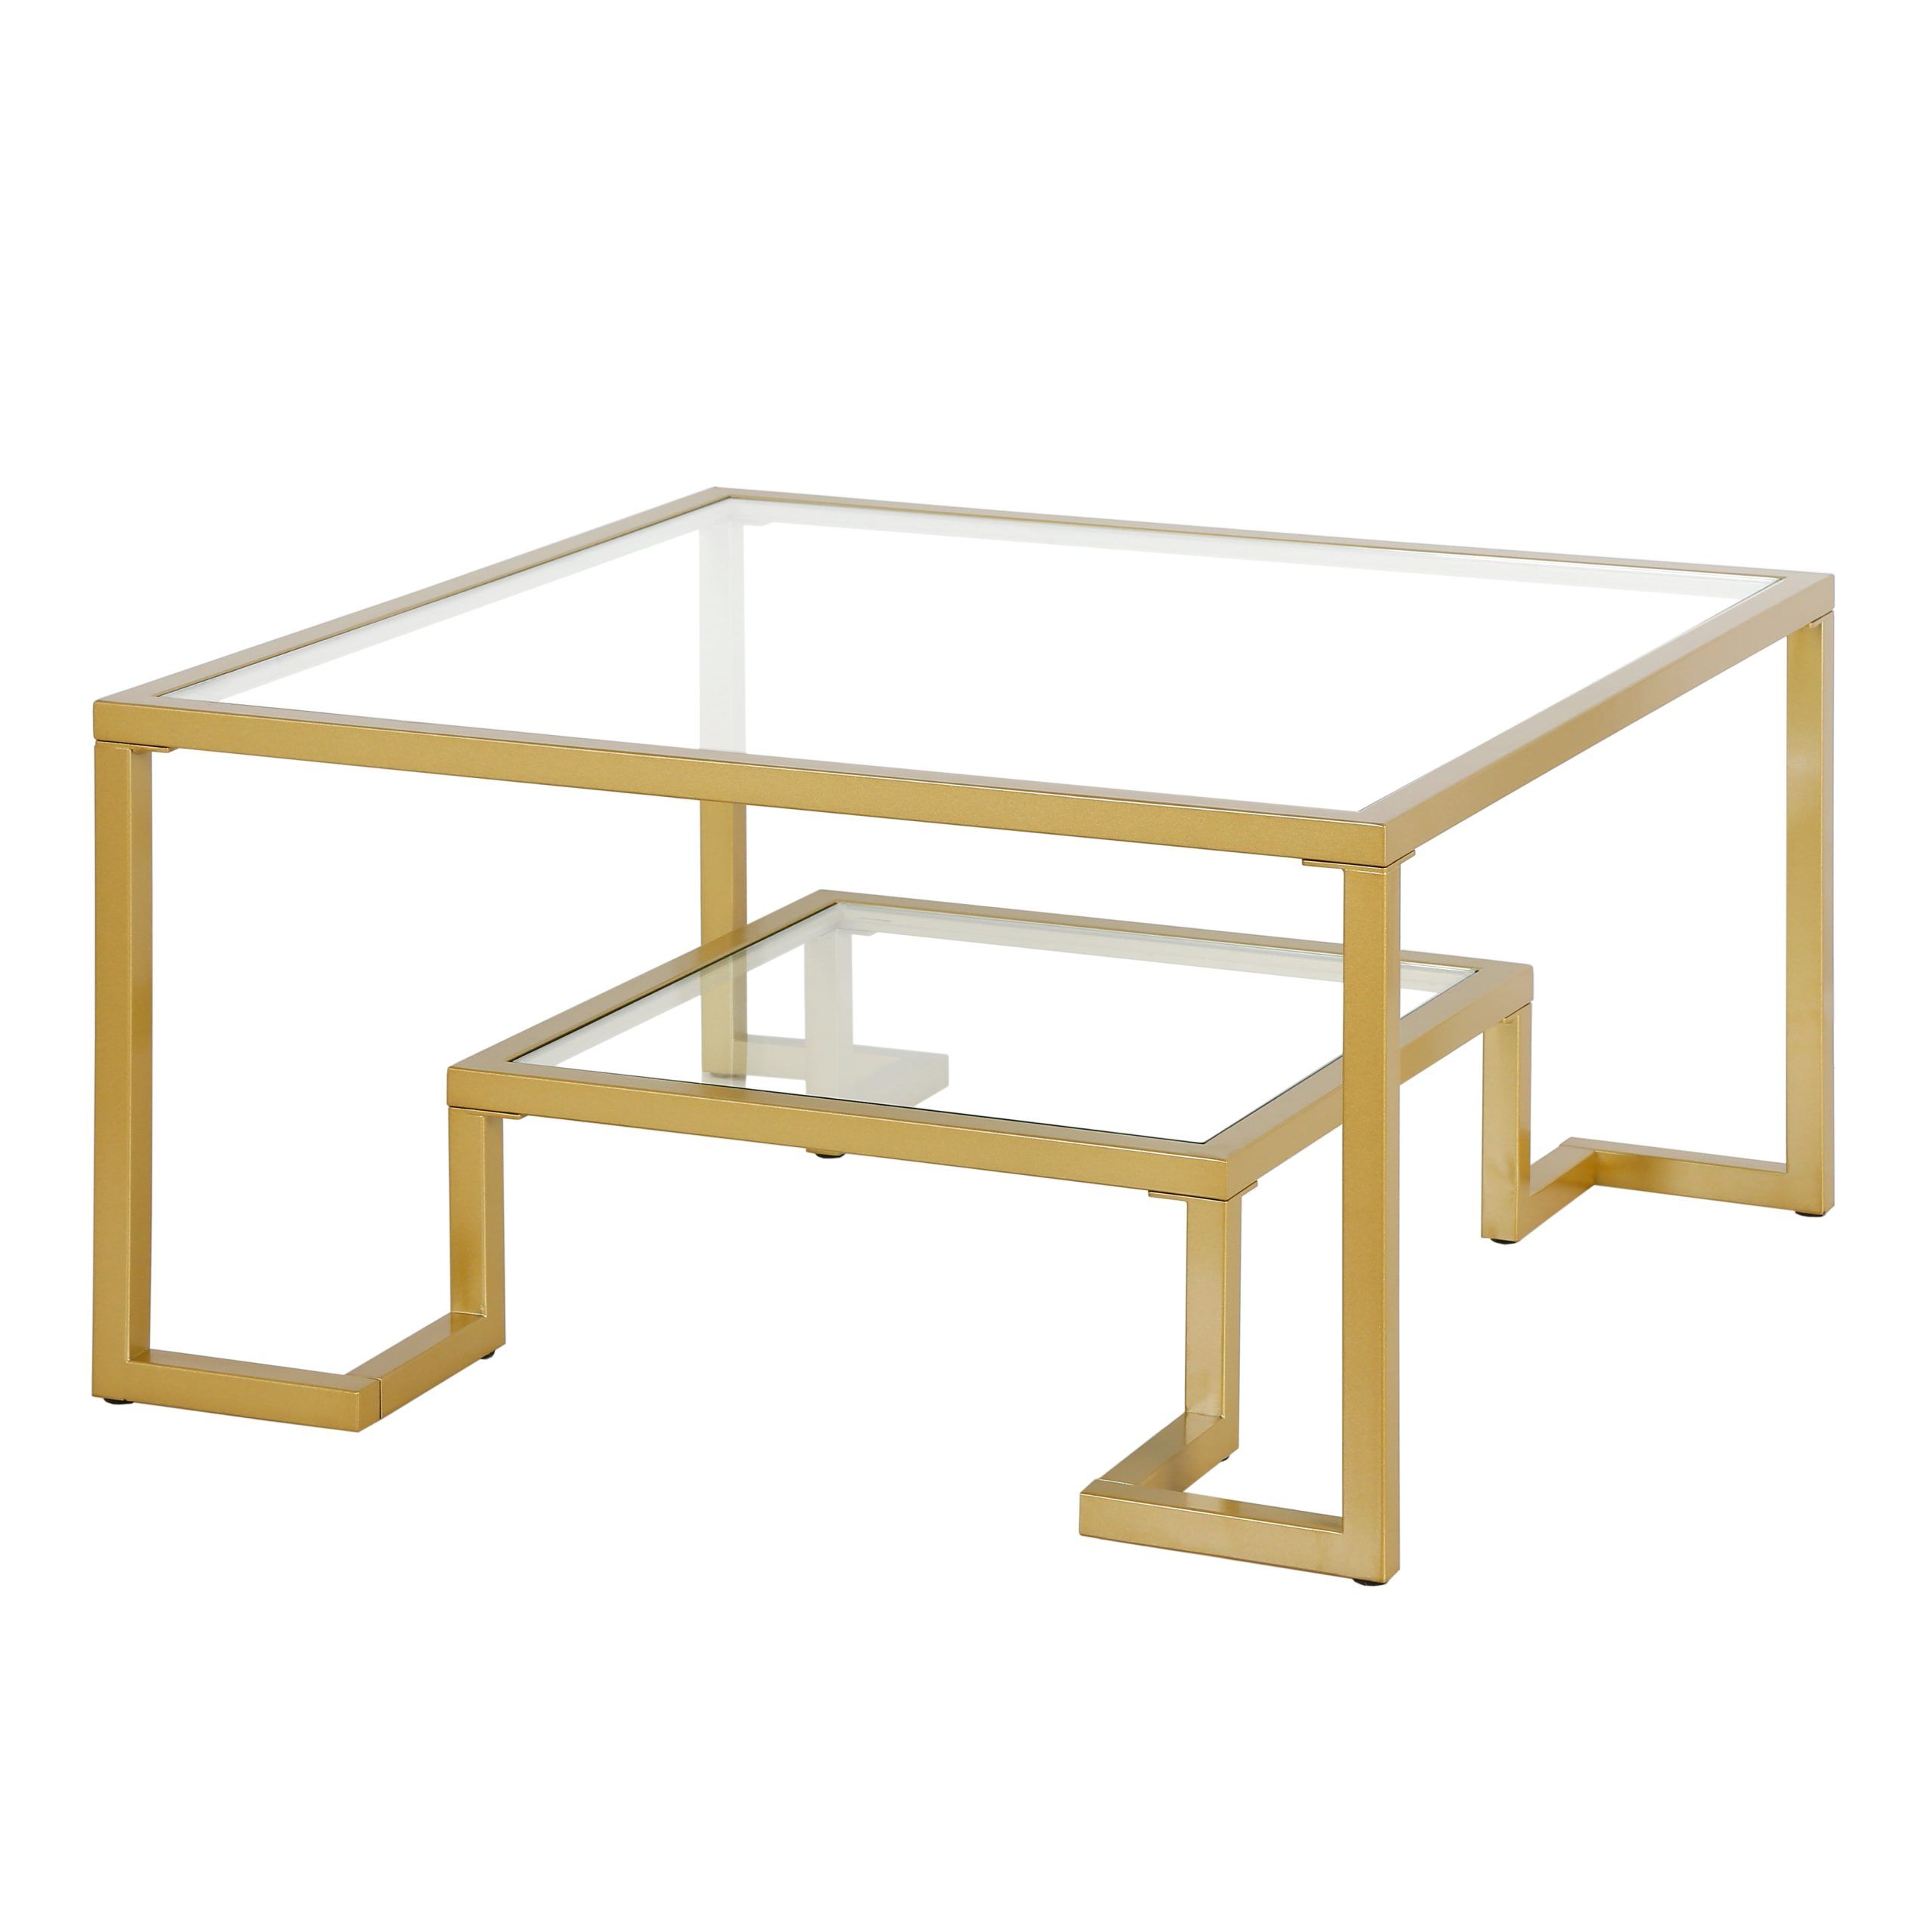 Famous Addison&lane Calix Square Tables Within Addison&lane Athena Square Coffee Table – Walmart (View 5 of 15)